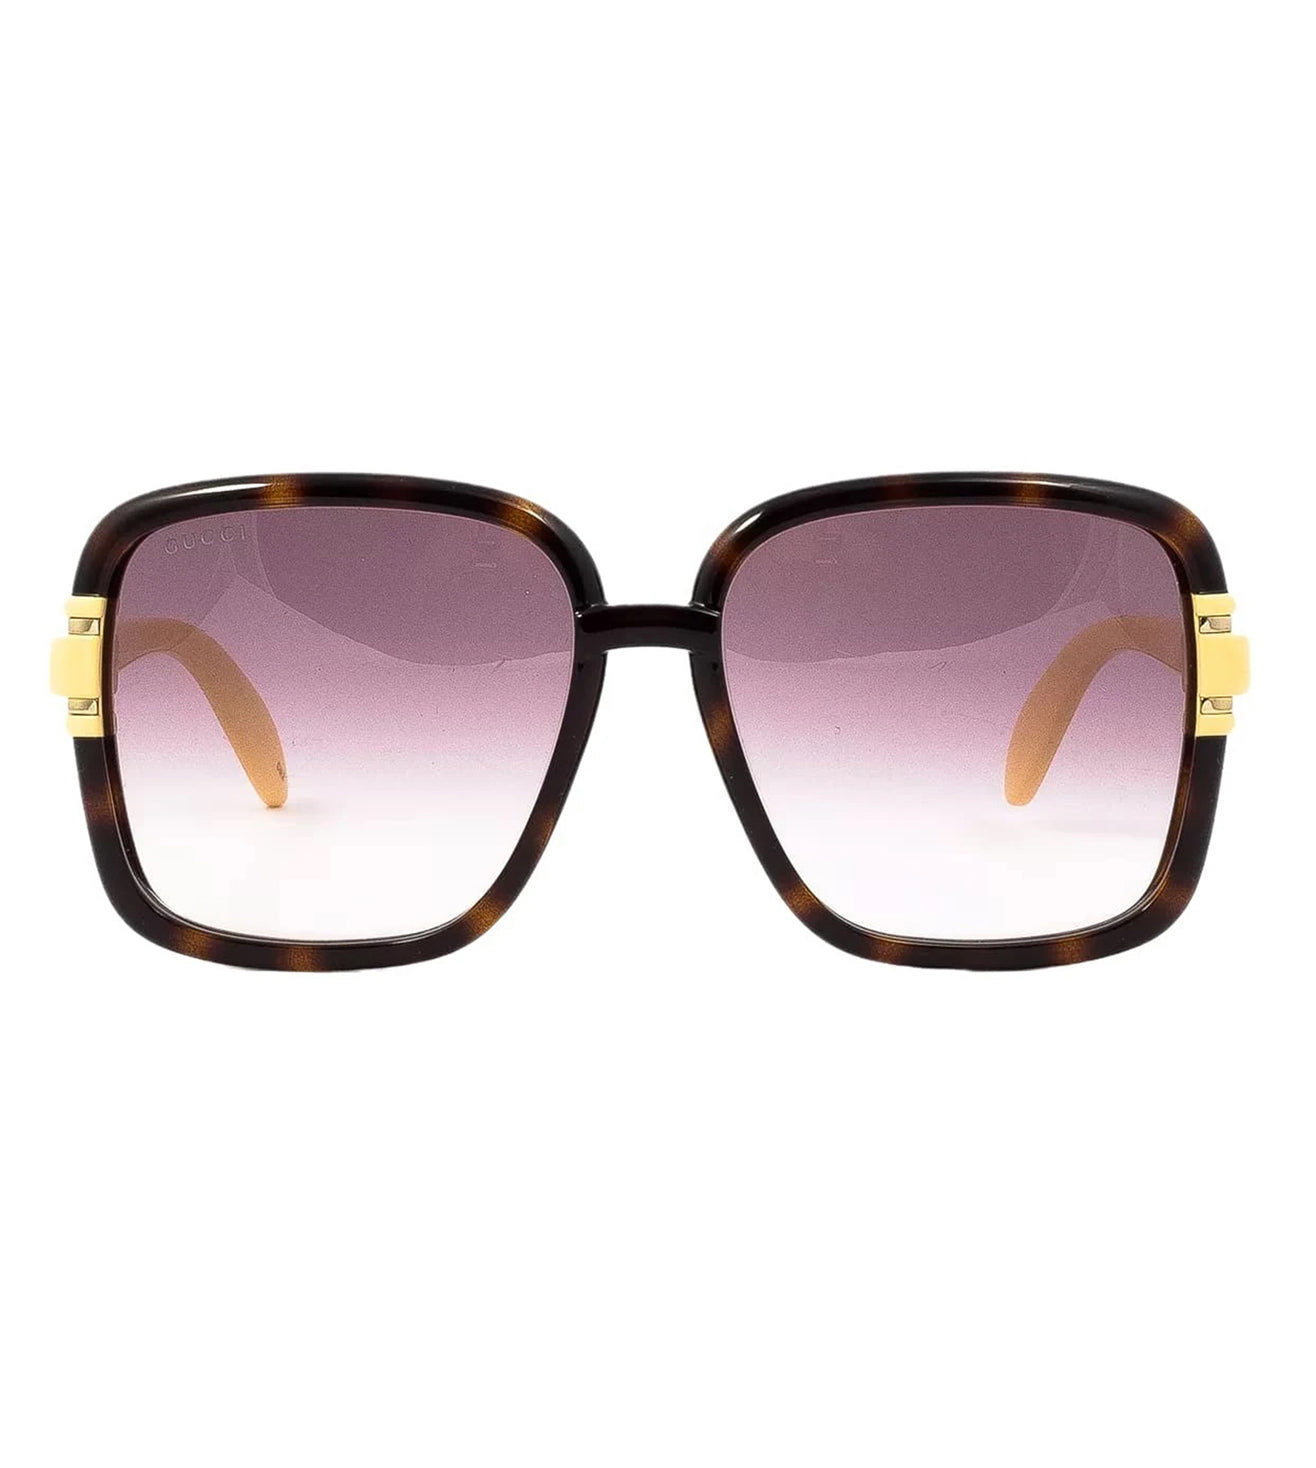 Gucci Women's Violet Butterfly Sunglasses